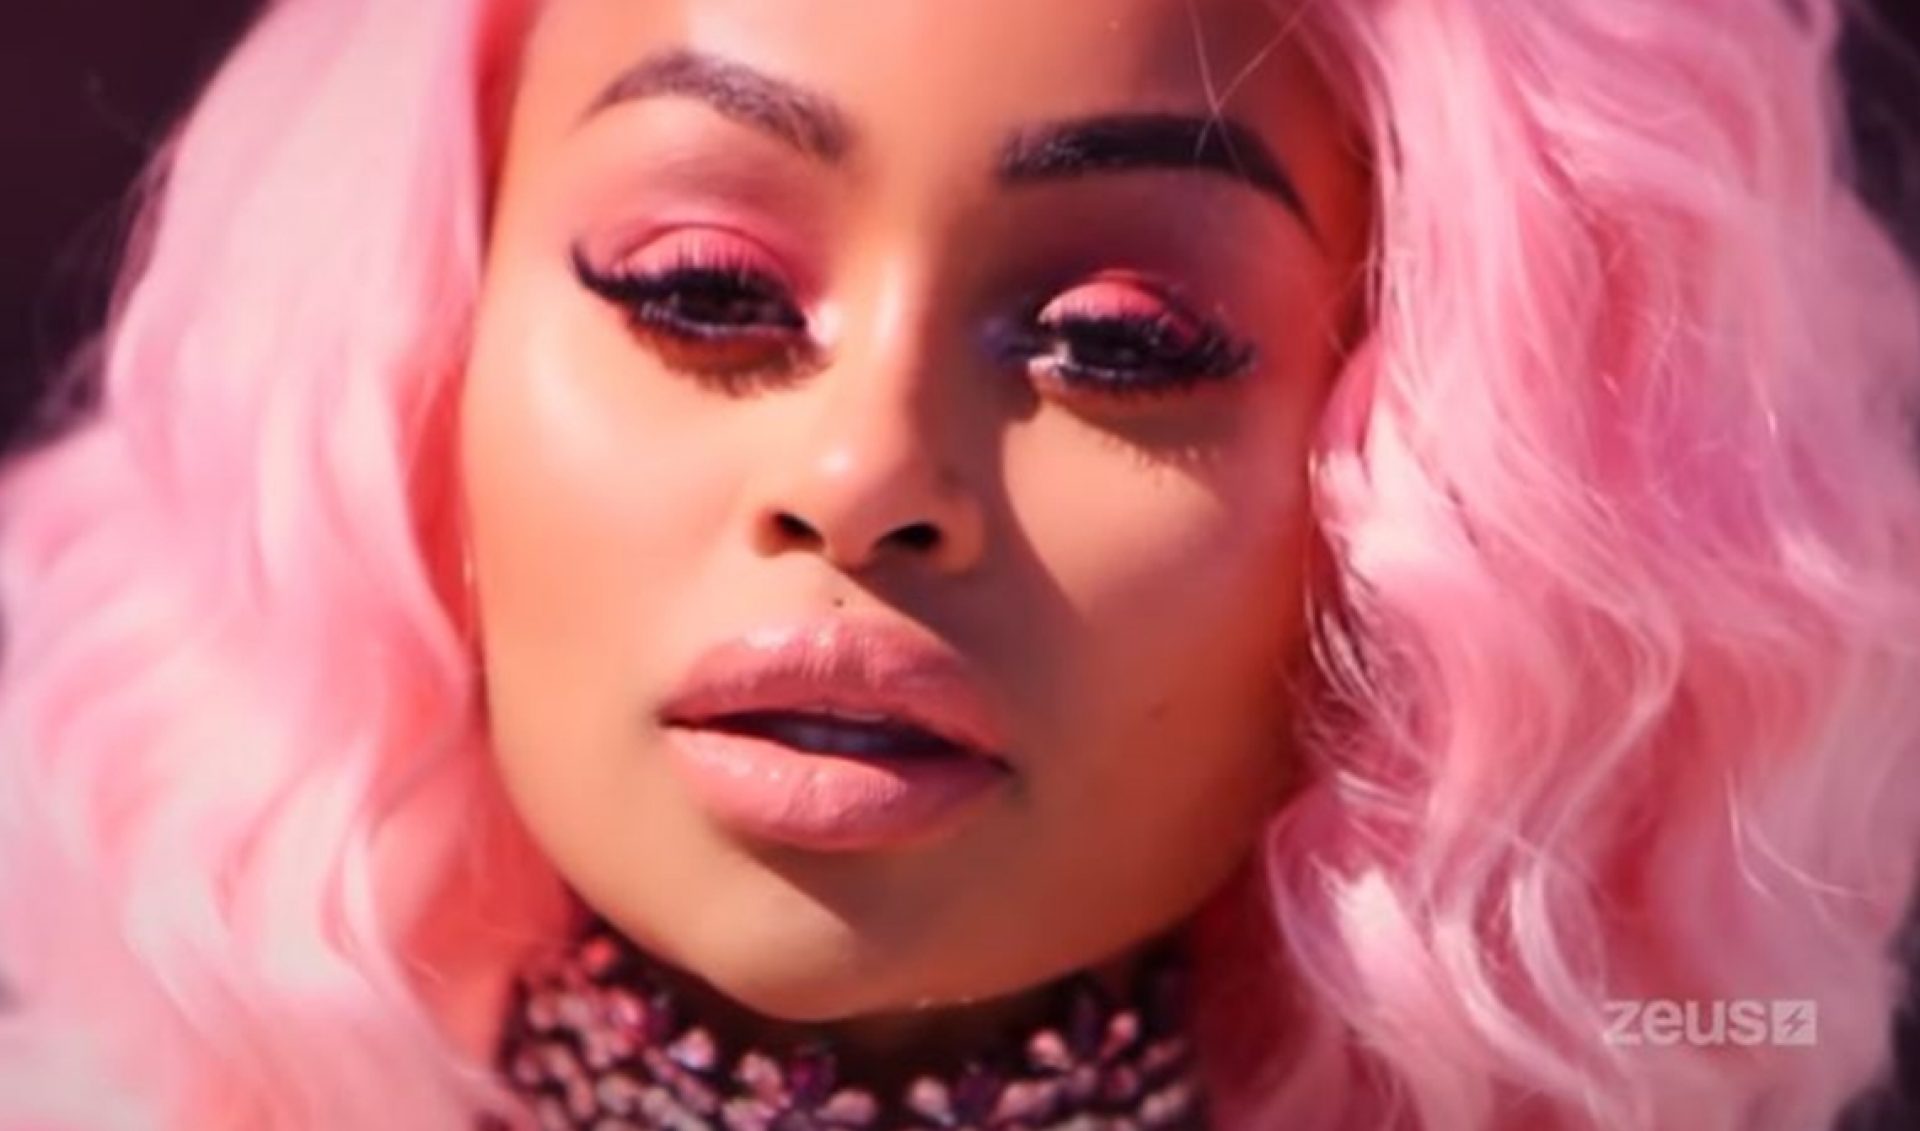 Creator-Founded Video Service Zeus Taps Blac Chyna For New Docuseries